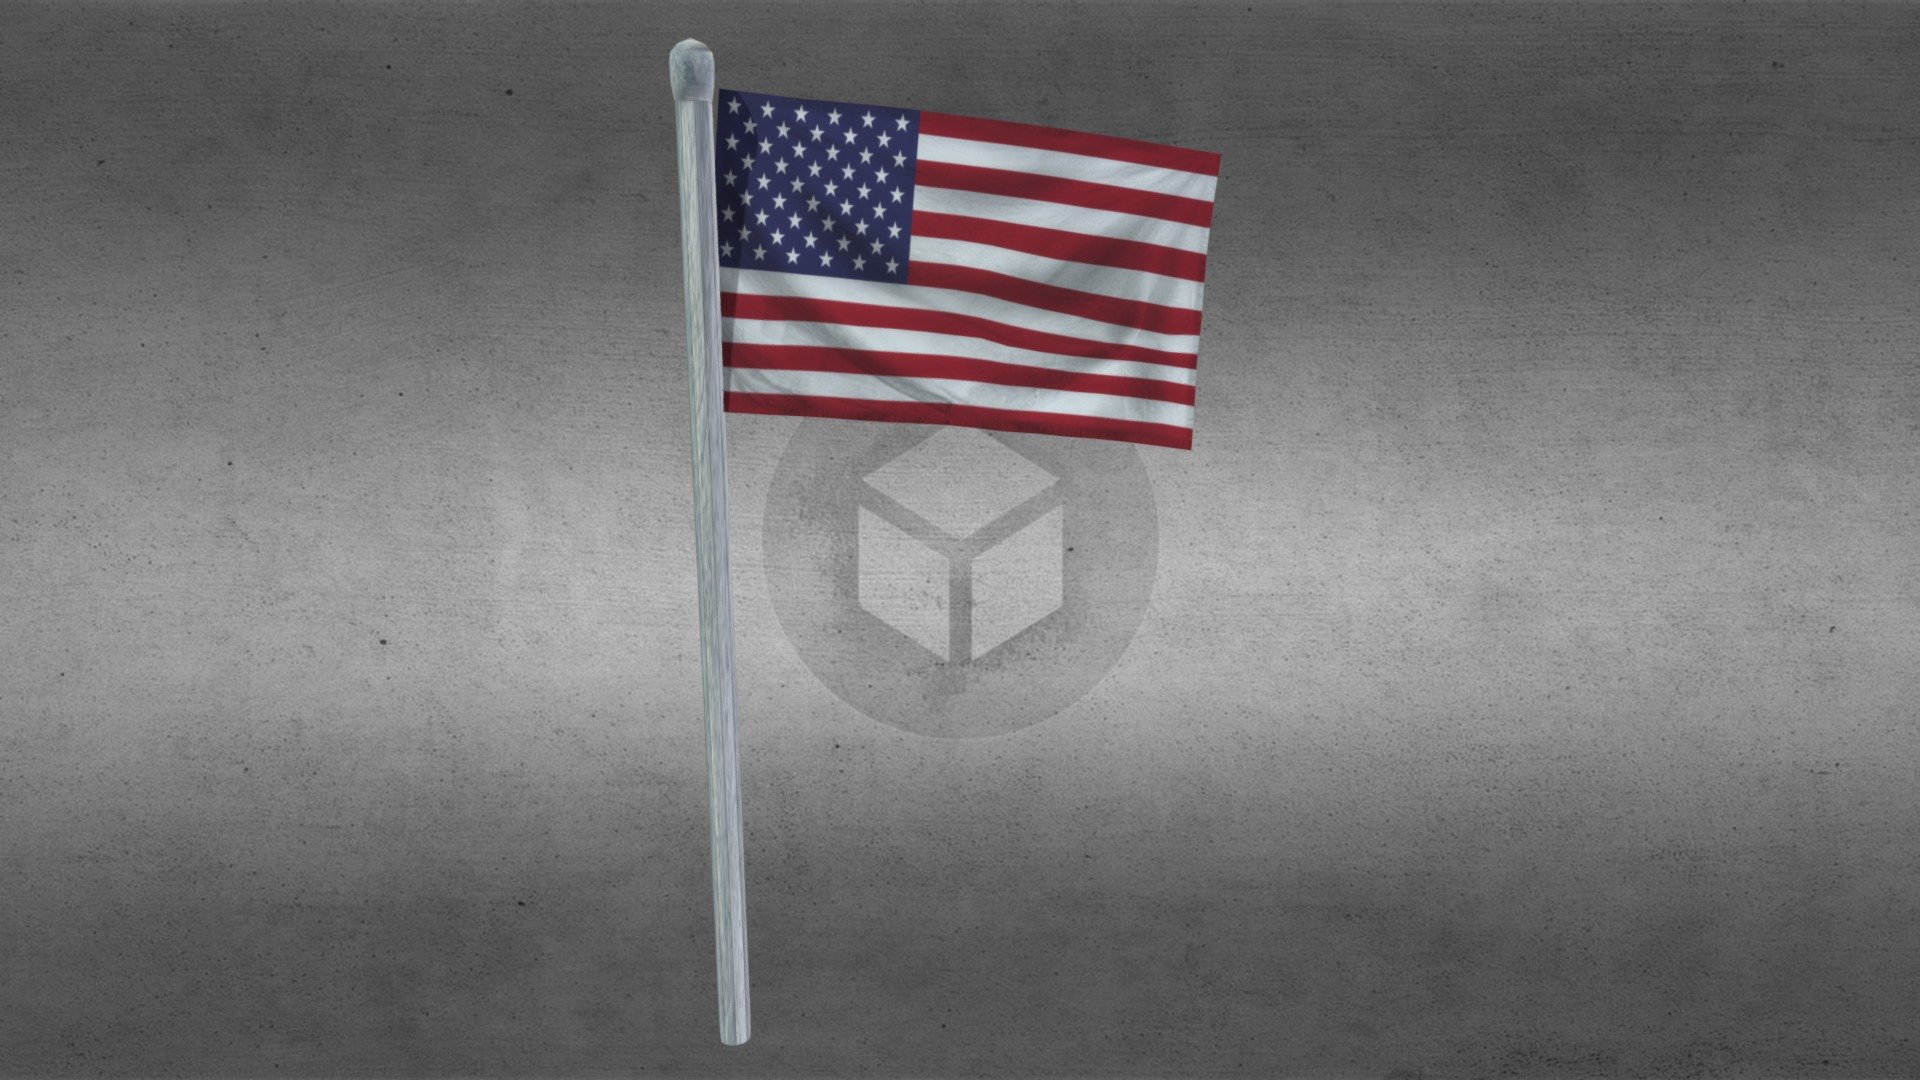 Capture the flag! anims included.. 1-20 raise the flag, 20 - 50 wave the flag.
Nice gameprop for fps games, here is american flag but you can easily make your own flag texture and apply it. easy uv 3d model